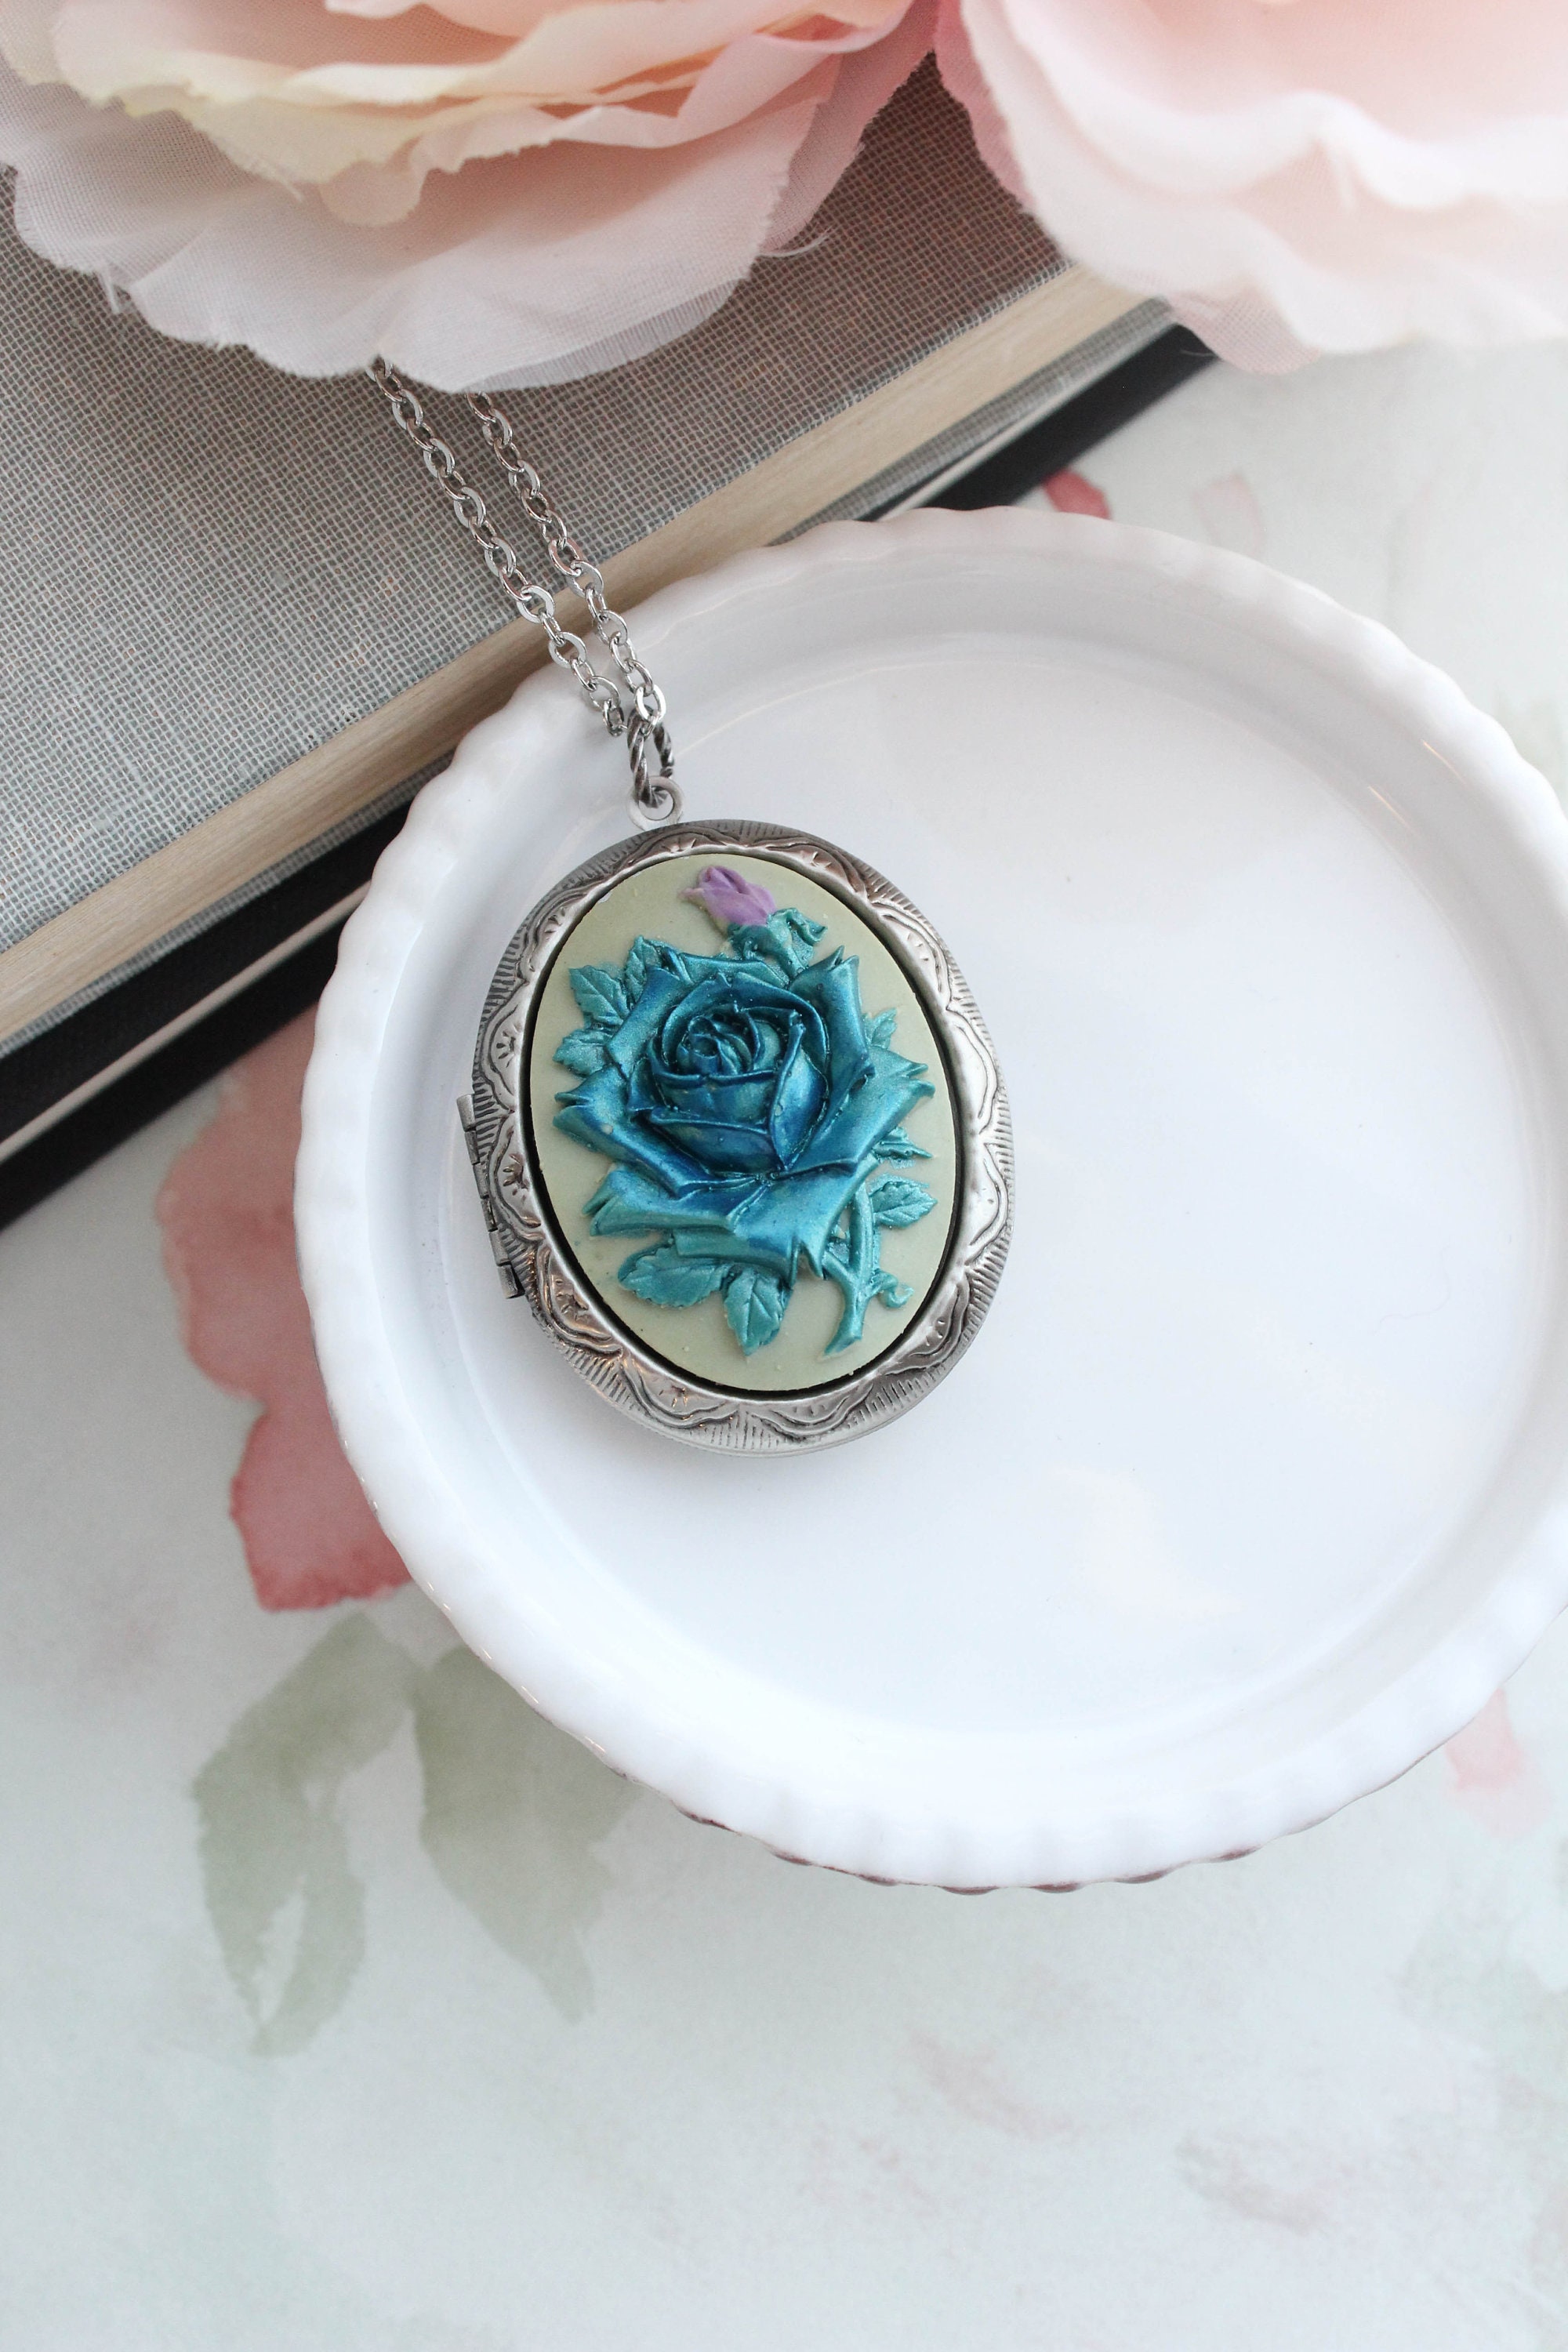 Discover our Dark Romance Goddess Oval Porcelain Cameo Locket Necklace –  SOMEFANCYNAME